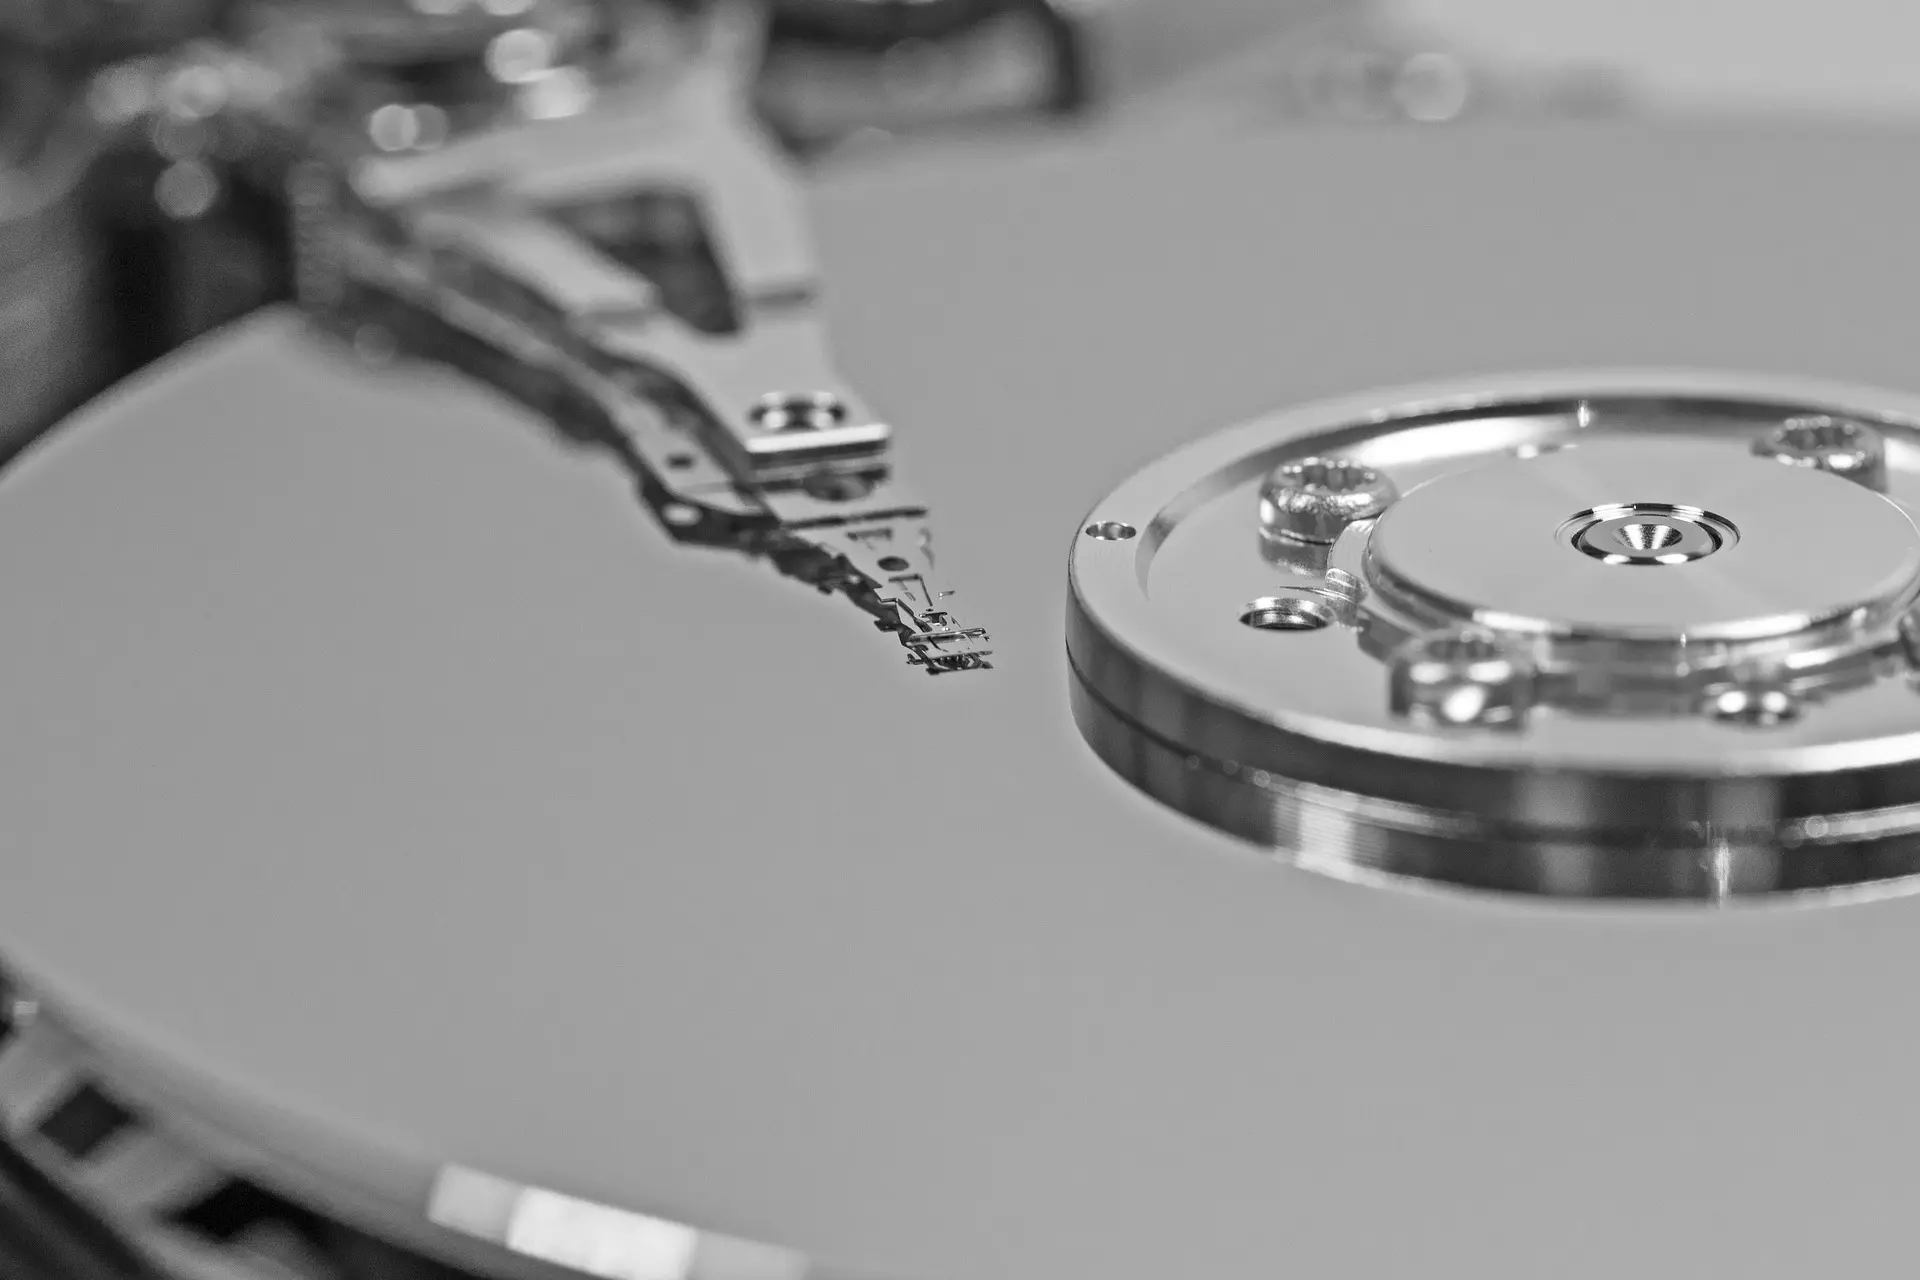 Close up view of a hard disk drive